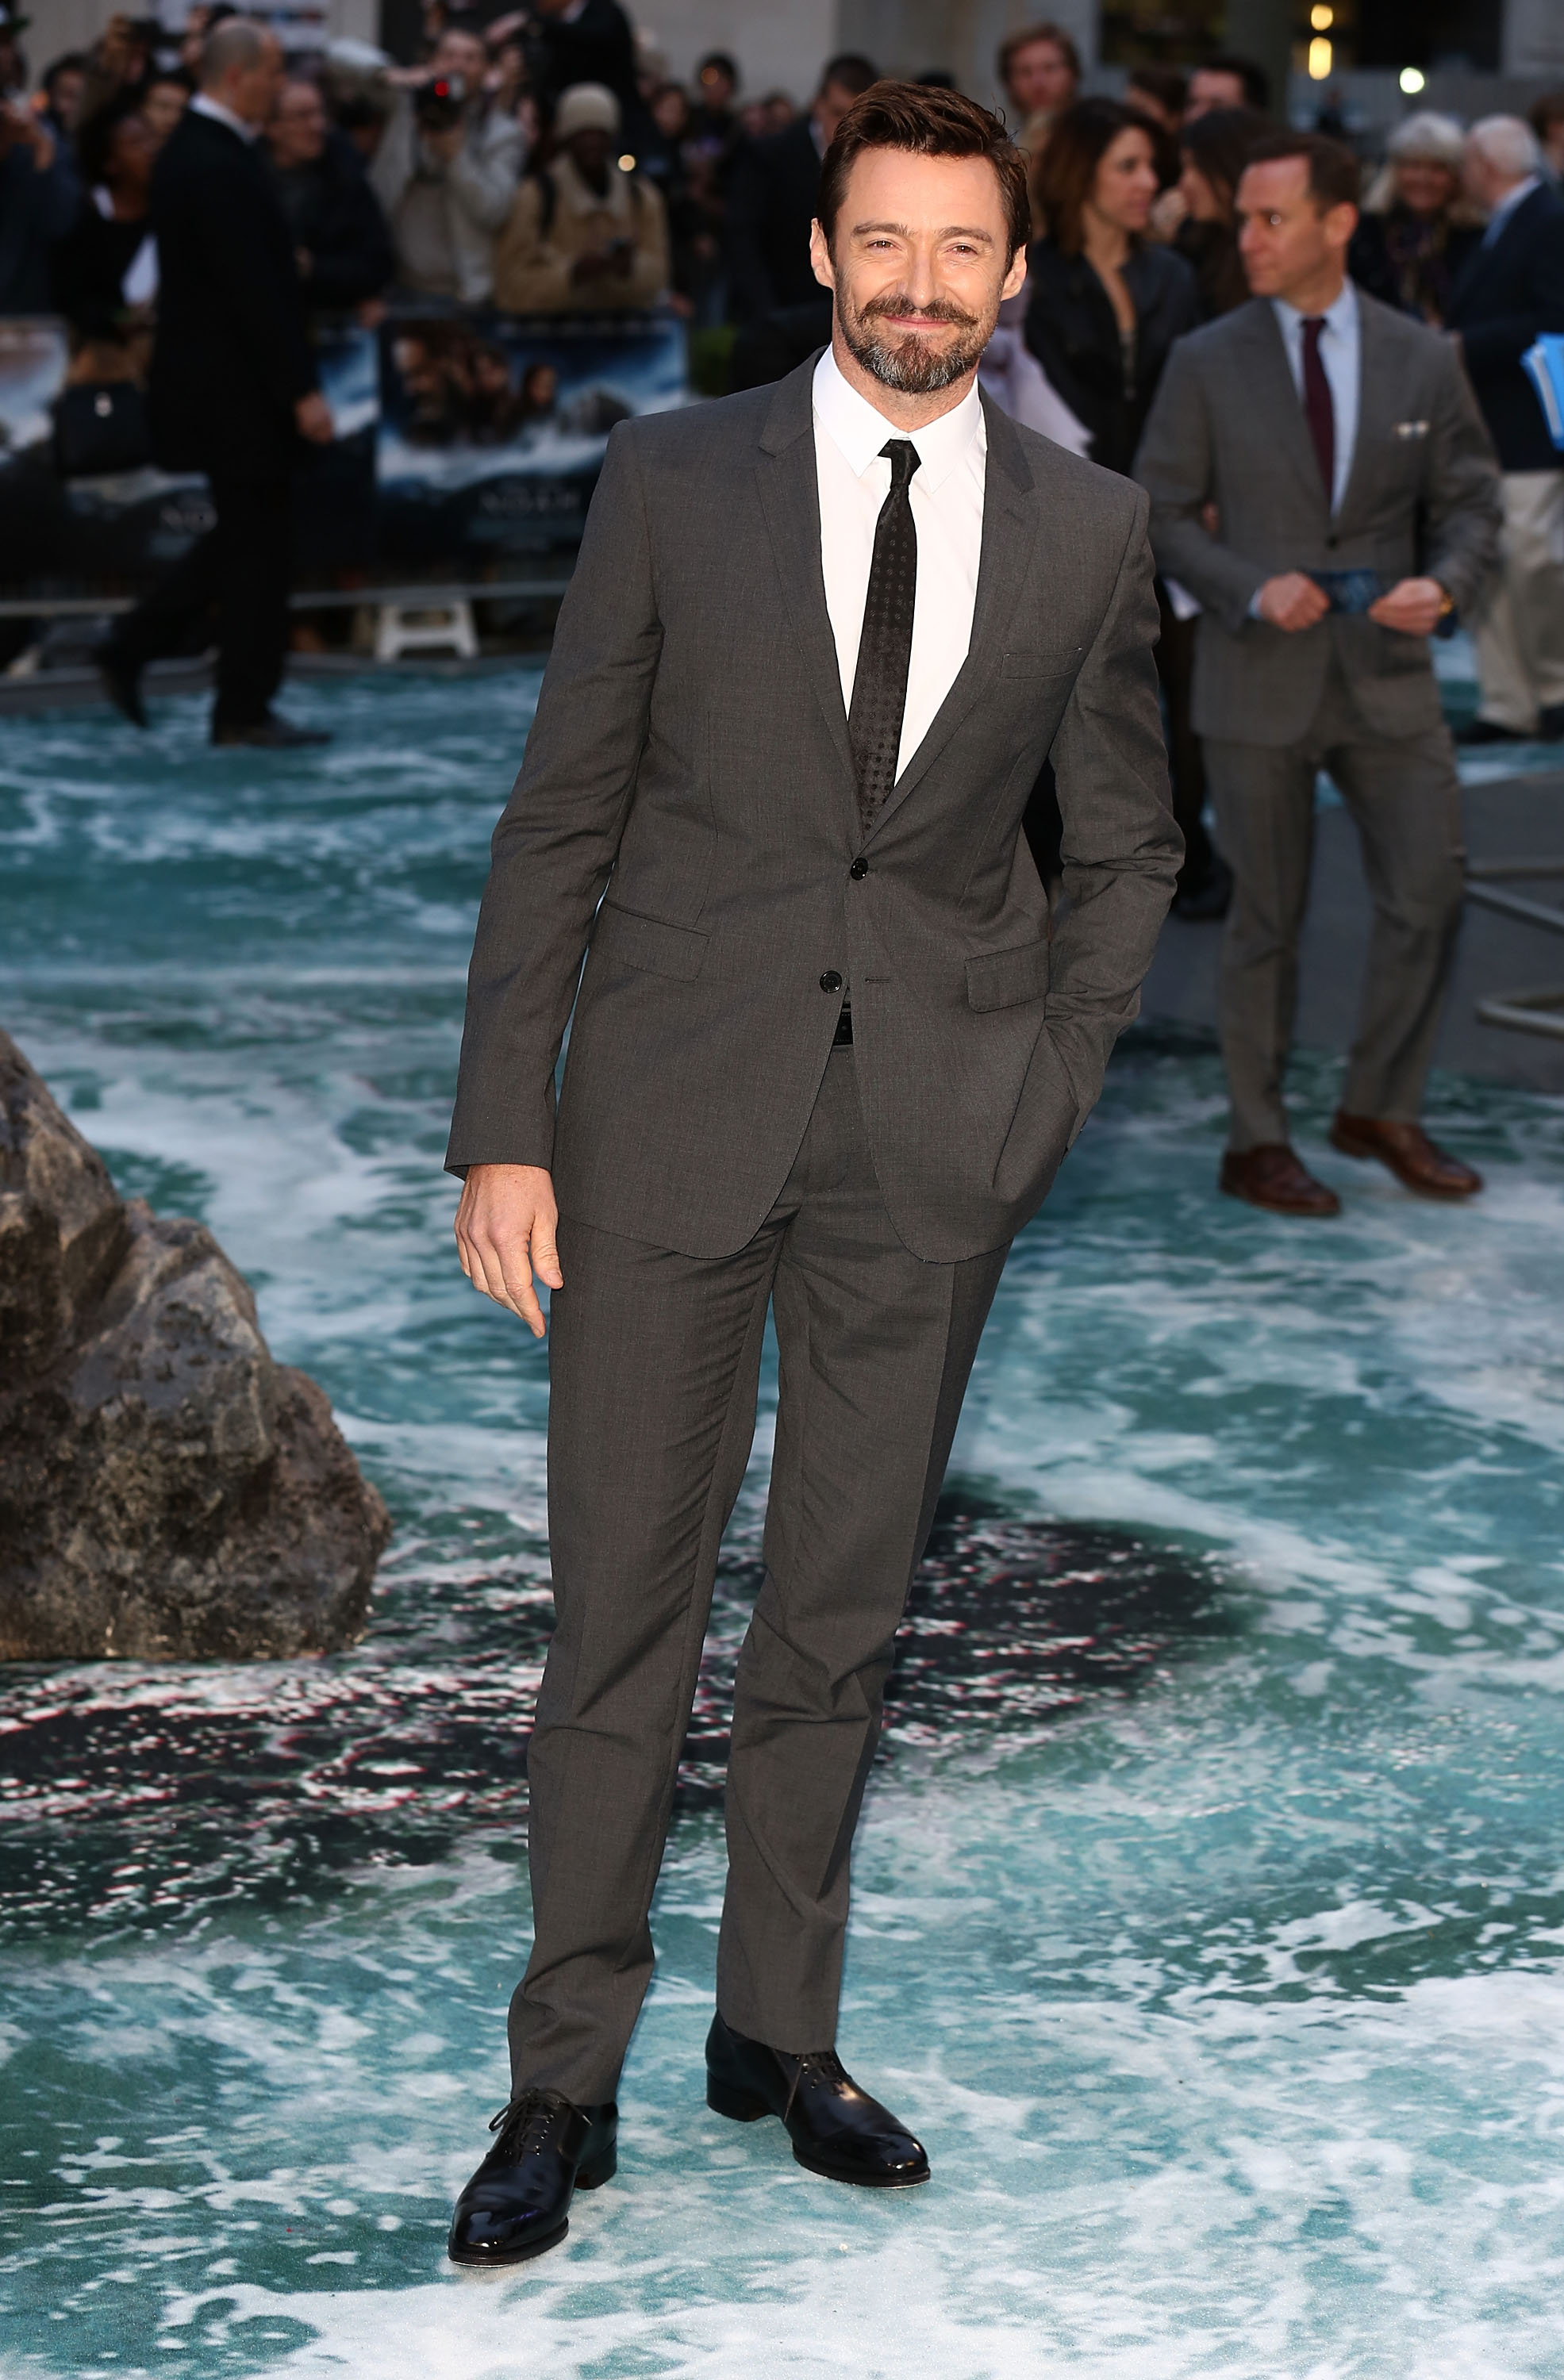 Hugh Jackman wearing Burberry to the premiere of Noah in London March 31st 2014 481747701